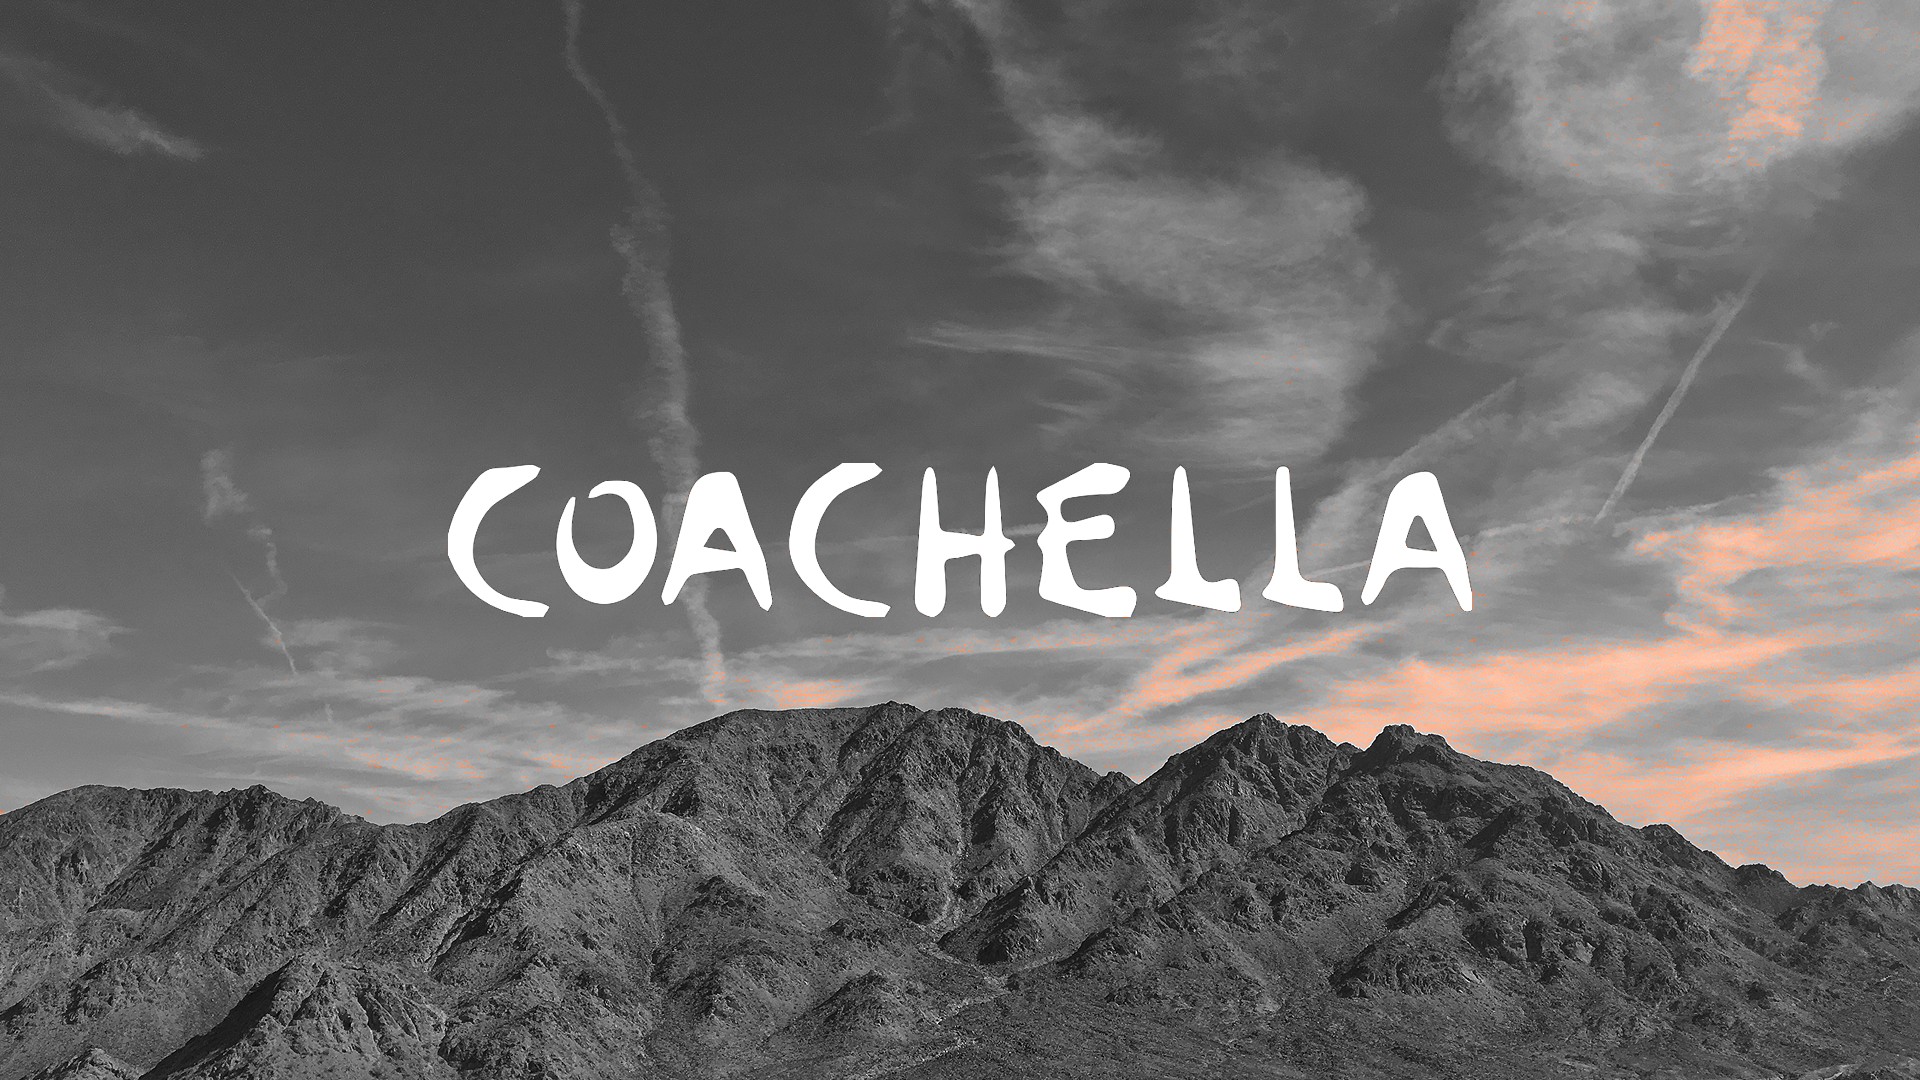 Coachella 2019 Wallpaper For Desktop with high-resolution 1920x1080 pixel. You can use this wallpaper for your Windows and Mac OS computers as well as your Android and iPhone smartphones